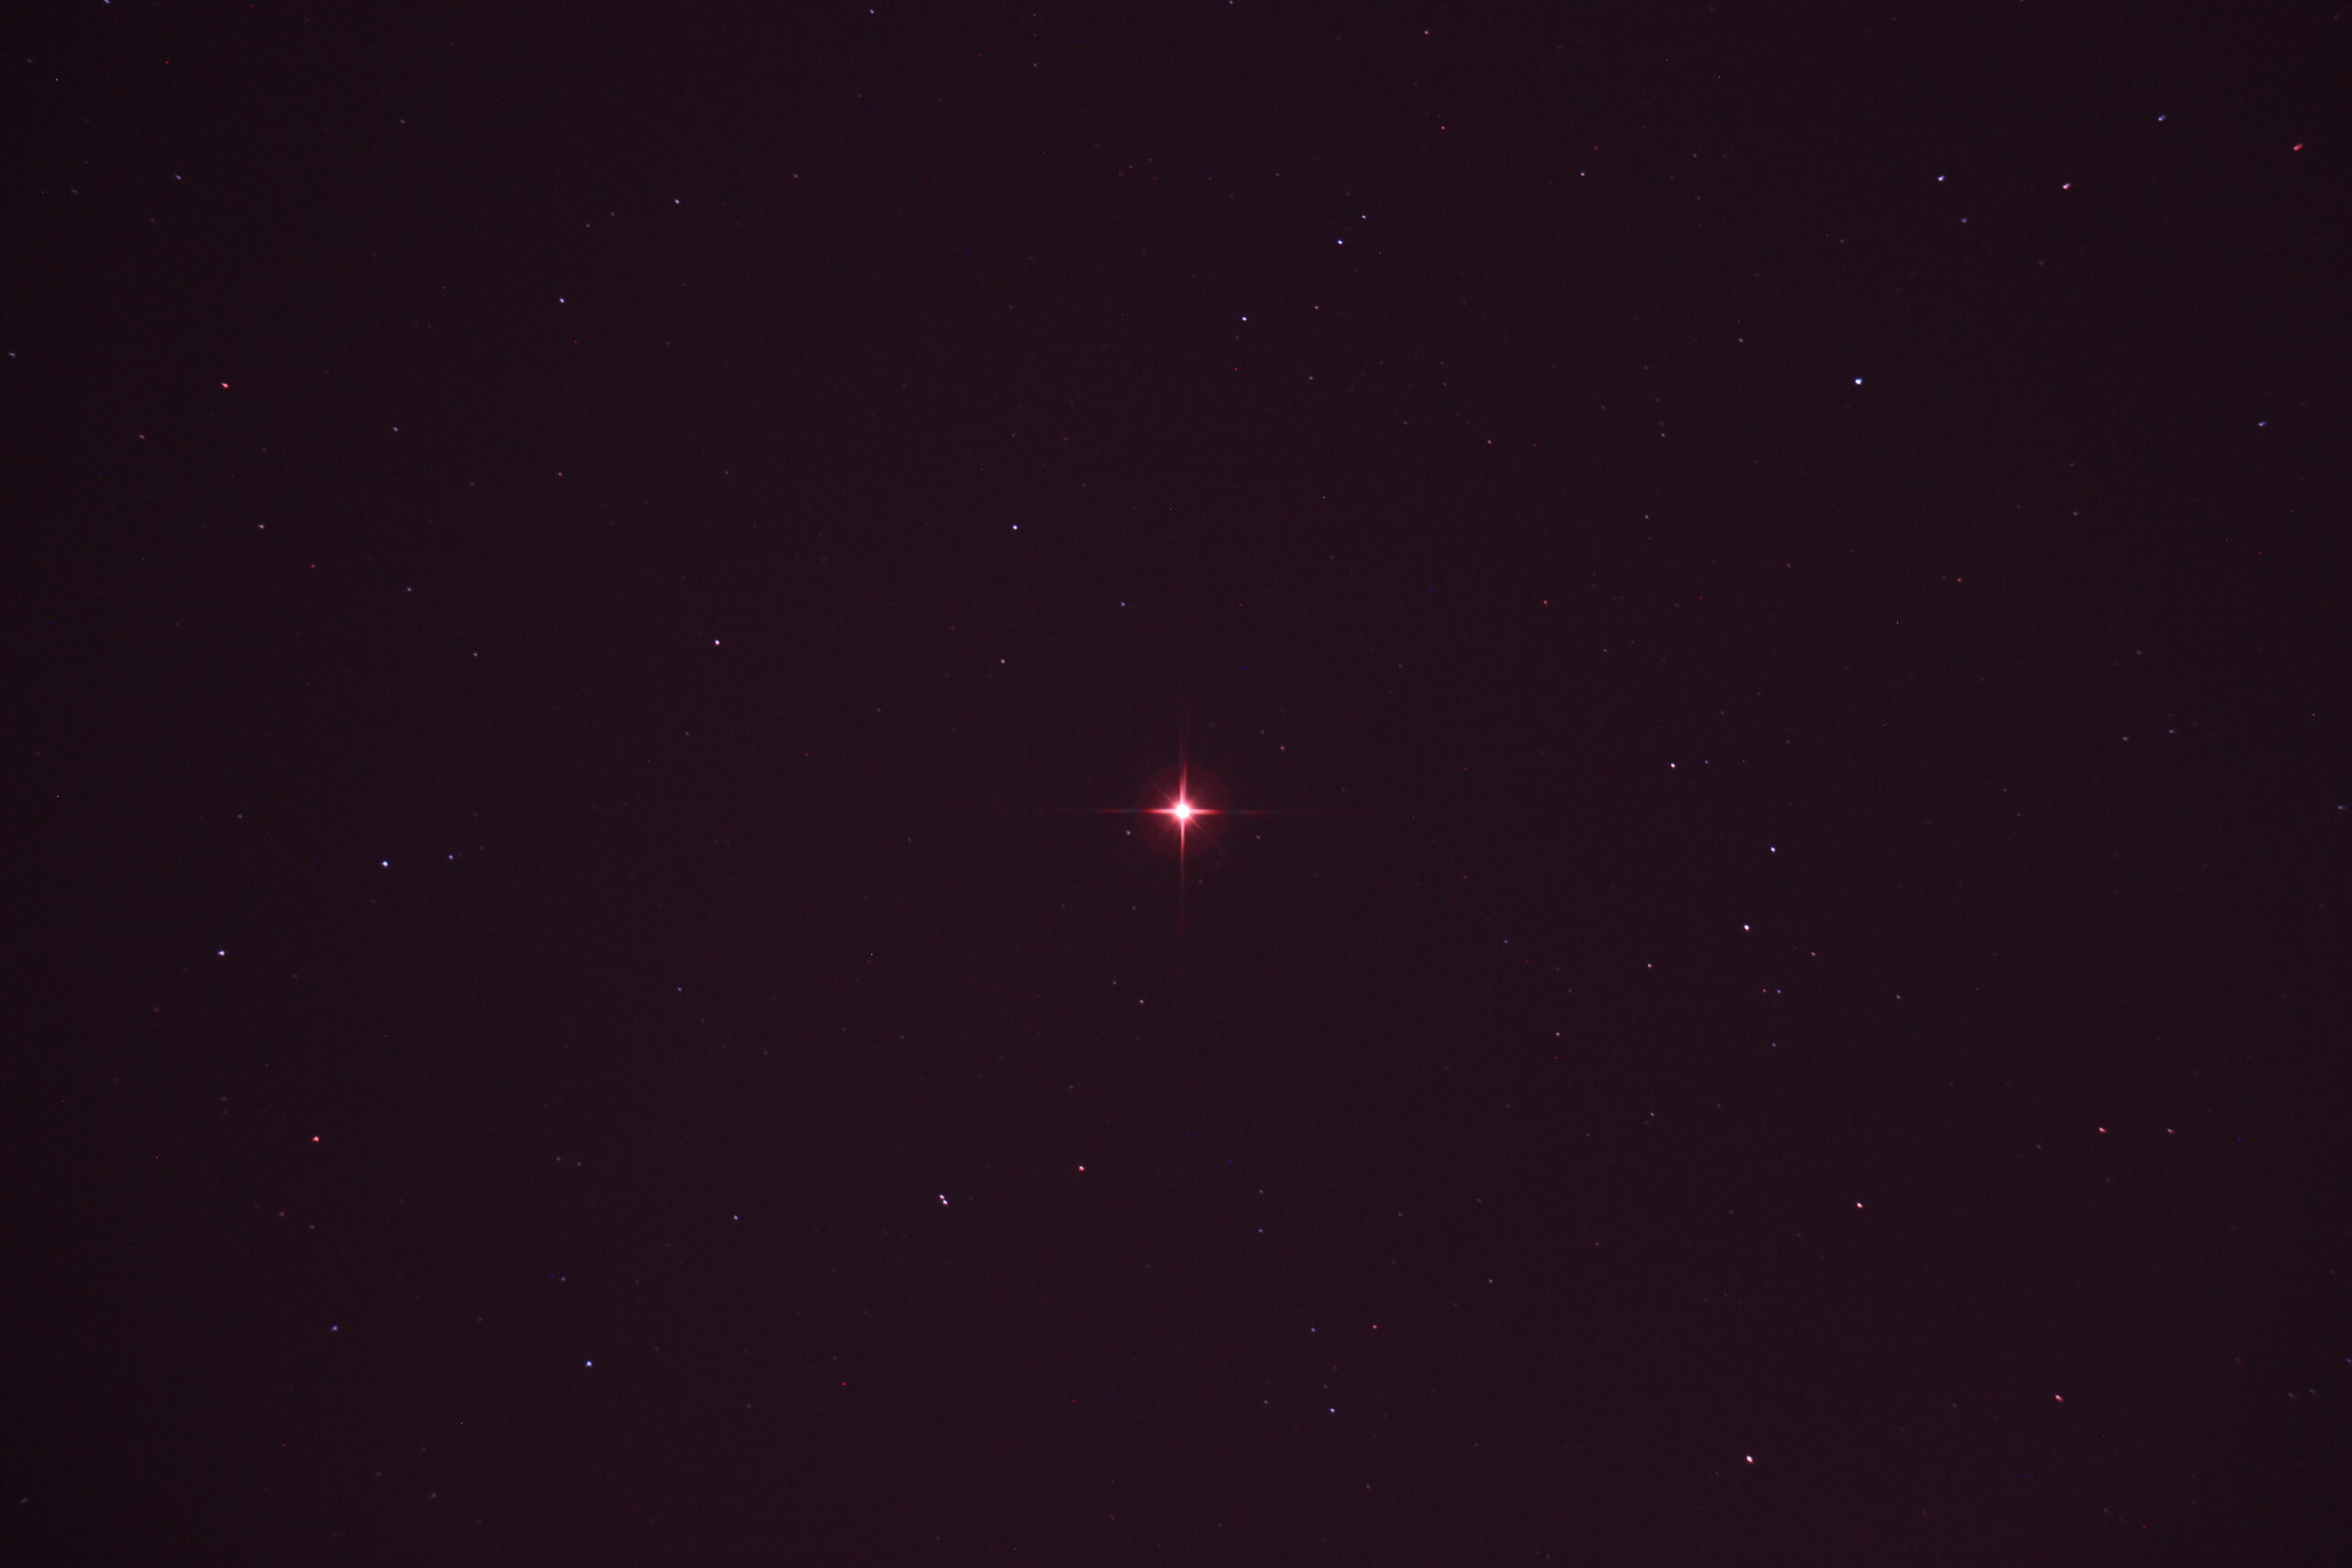 Betelgeuse is a very bright star